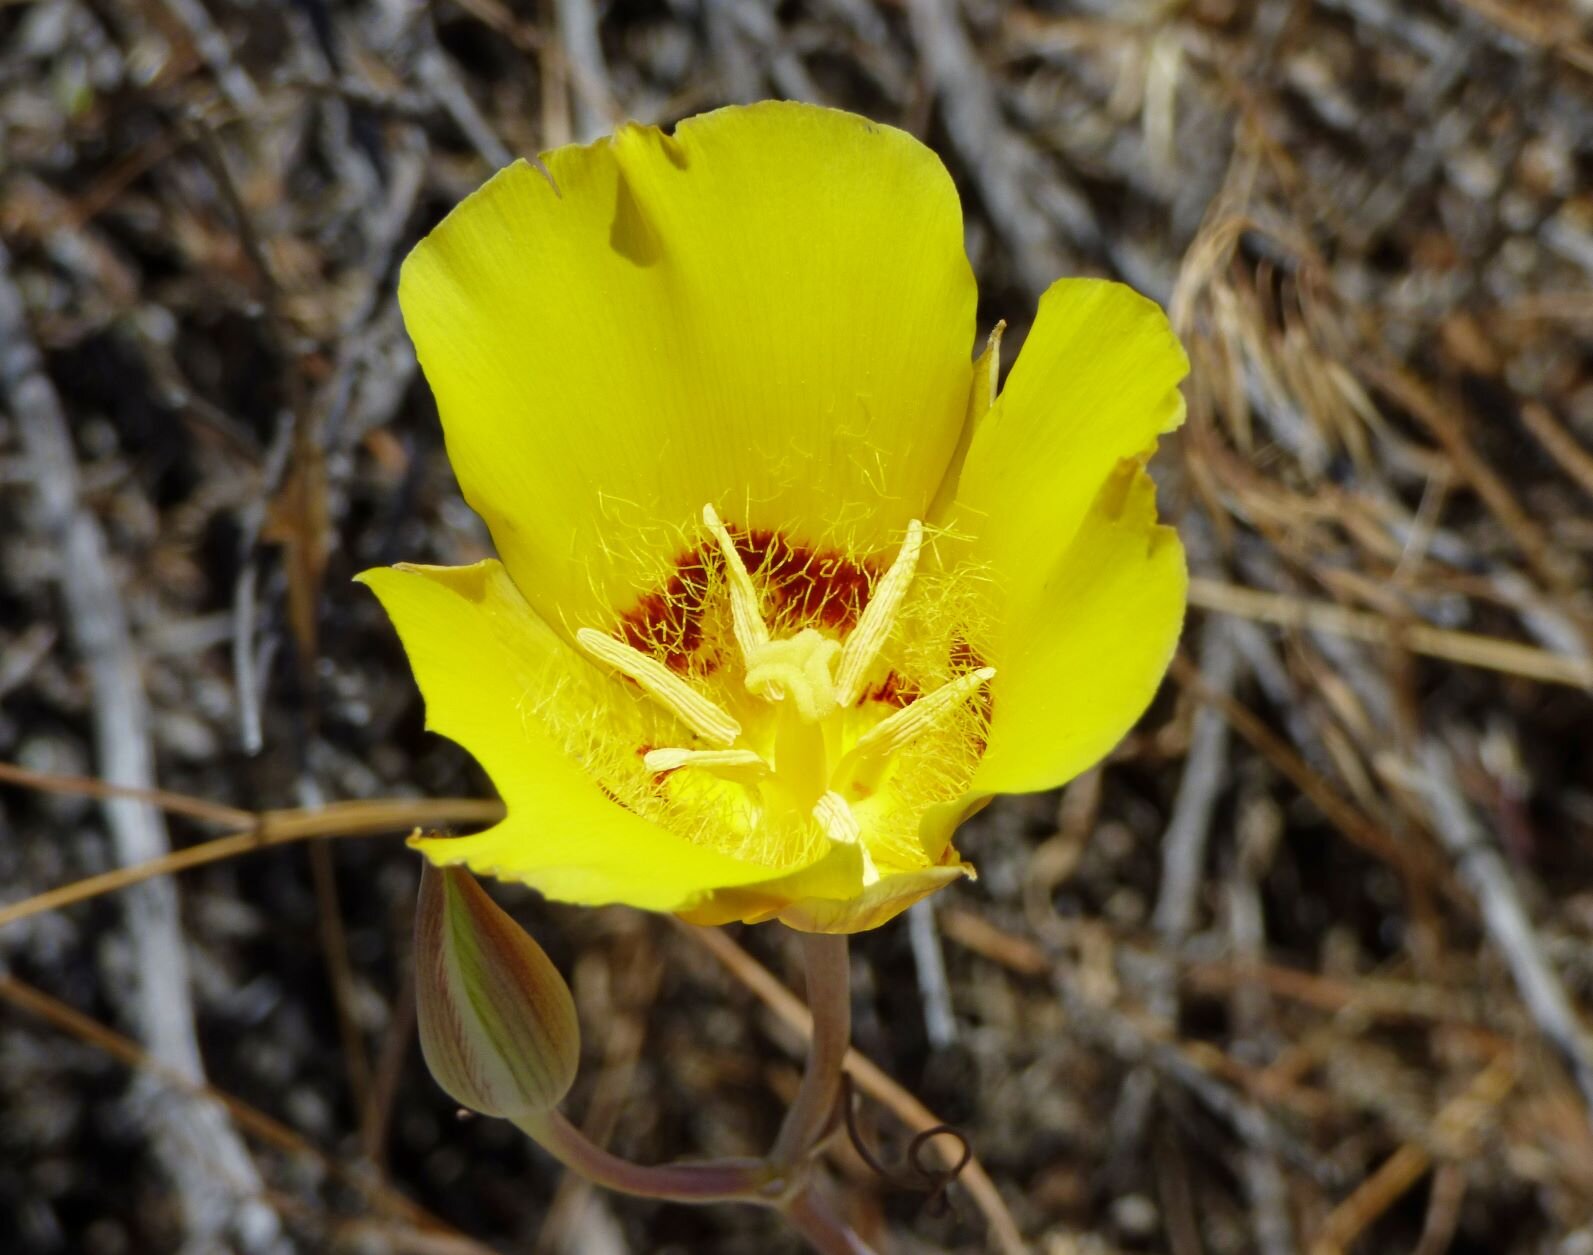 On the way back we stopped for Golden-bowl Mariposa Lily (Calochortus concolor)